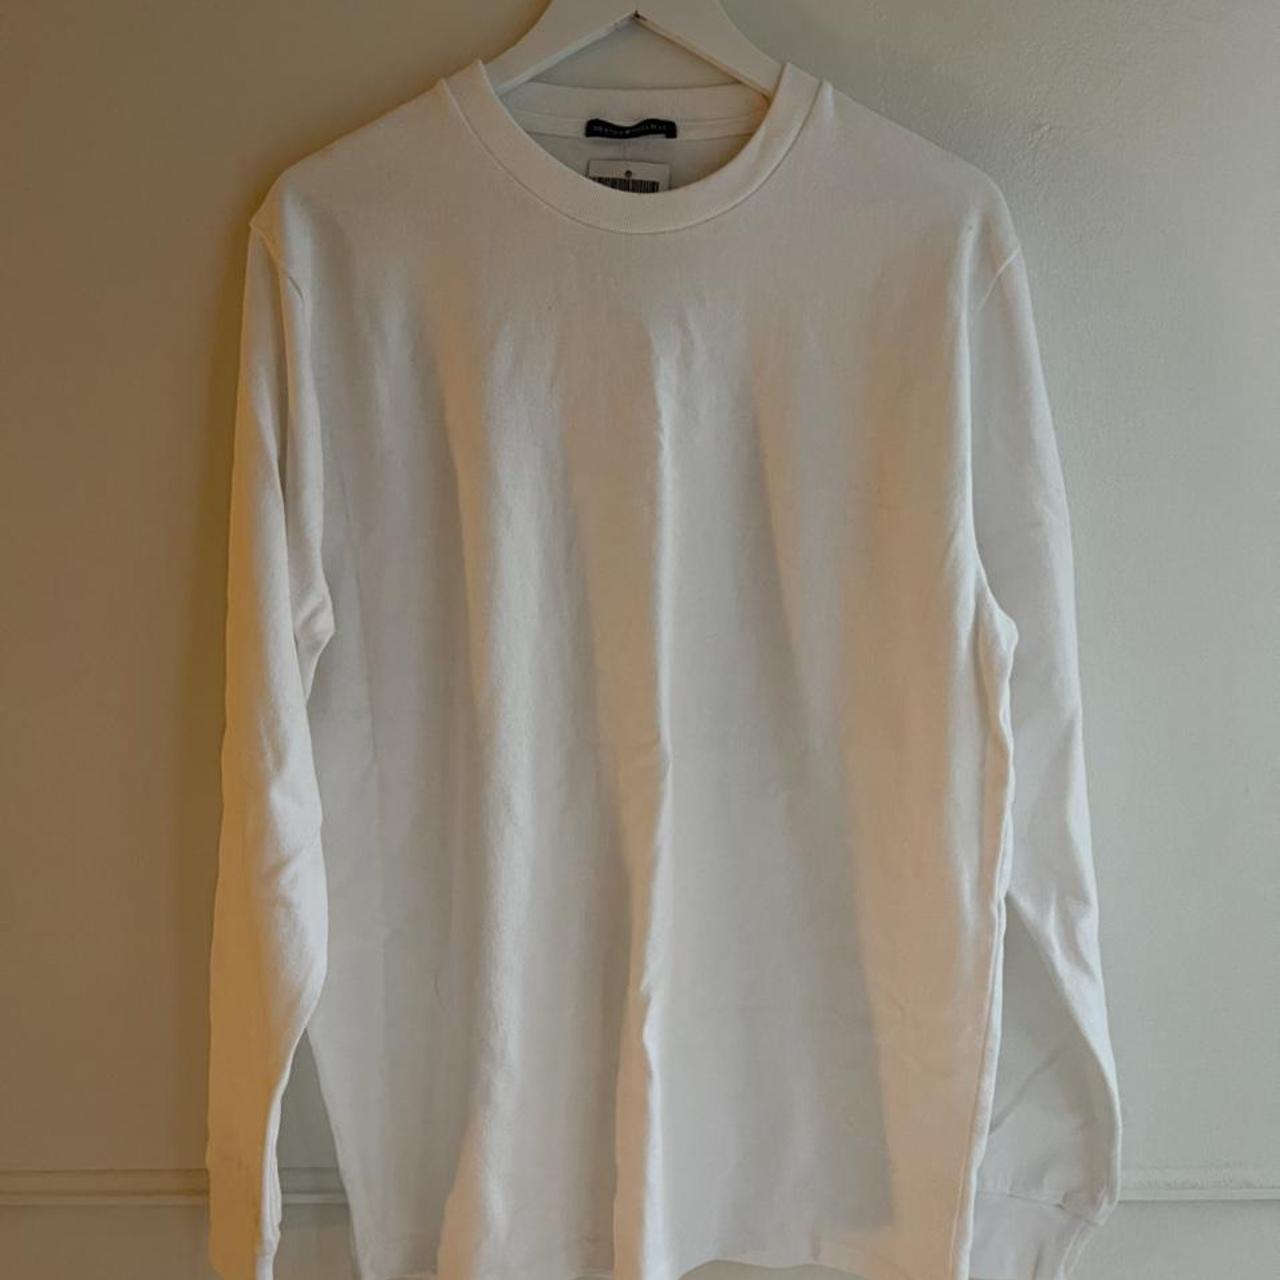 Product Image 1 - Brandy Melville White Sweatshirt Pullover